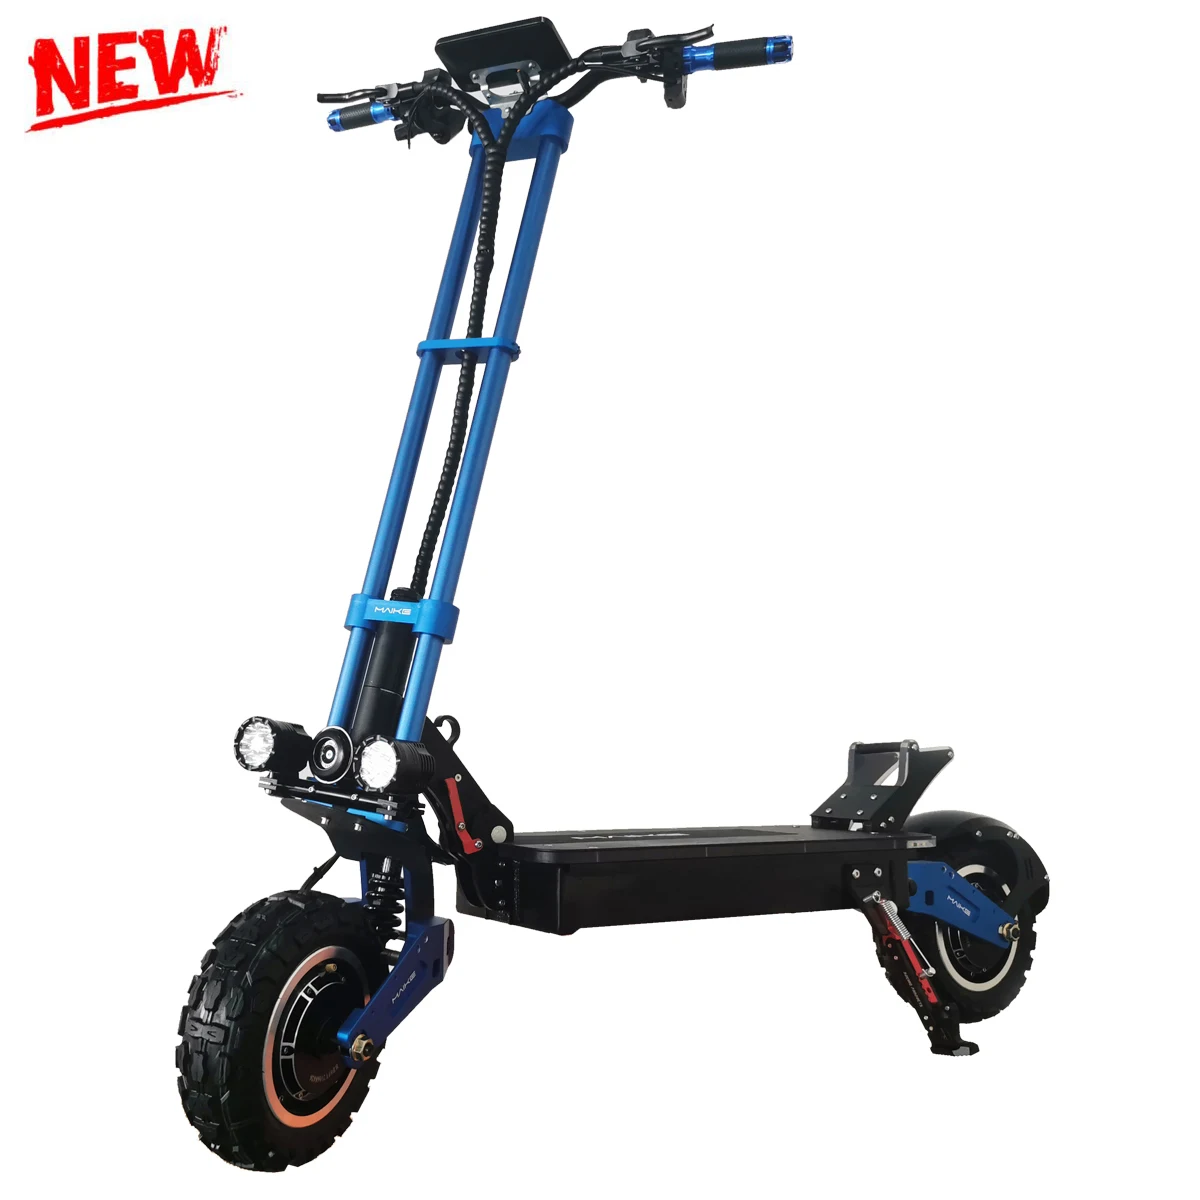 

Hot Sale High Quality maike kk10s pro e scooters for adults 5600w high speed scooter 85km/h fastest electric scooter powerful